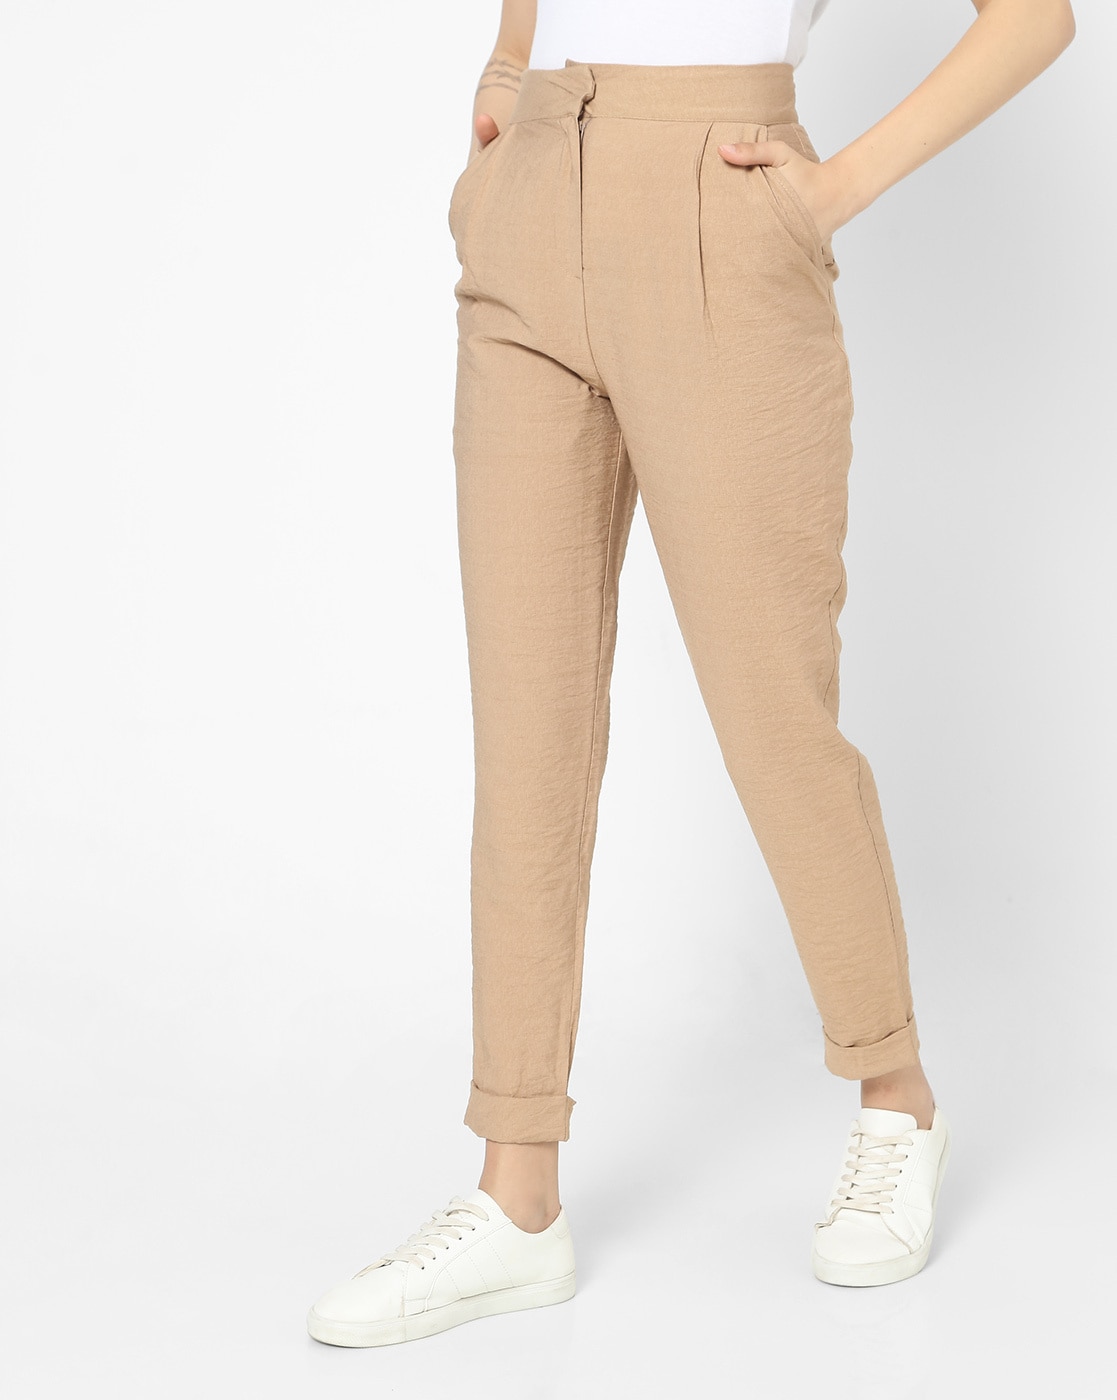 Buy Light Brown Trousers & Pants for Women by Sateen Online | Ajio.com